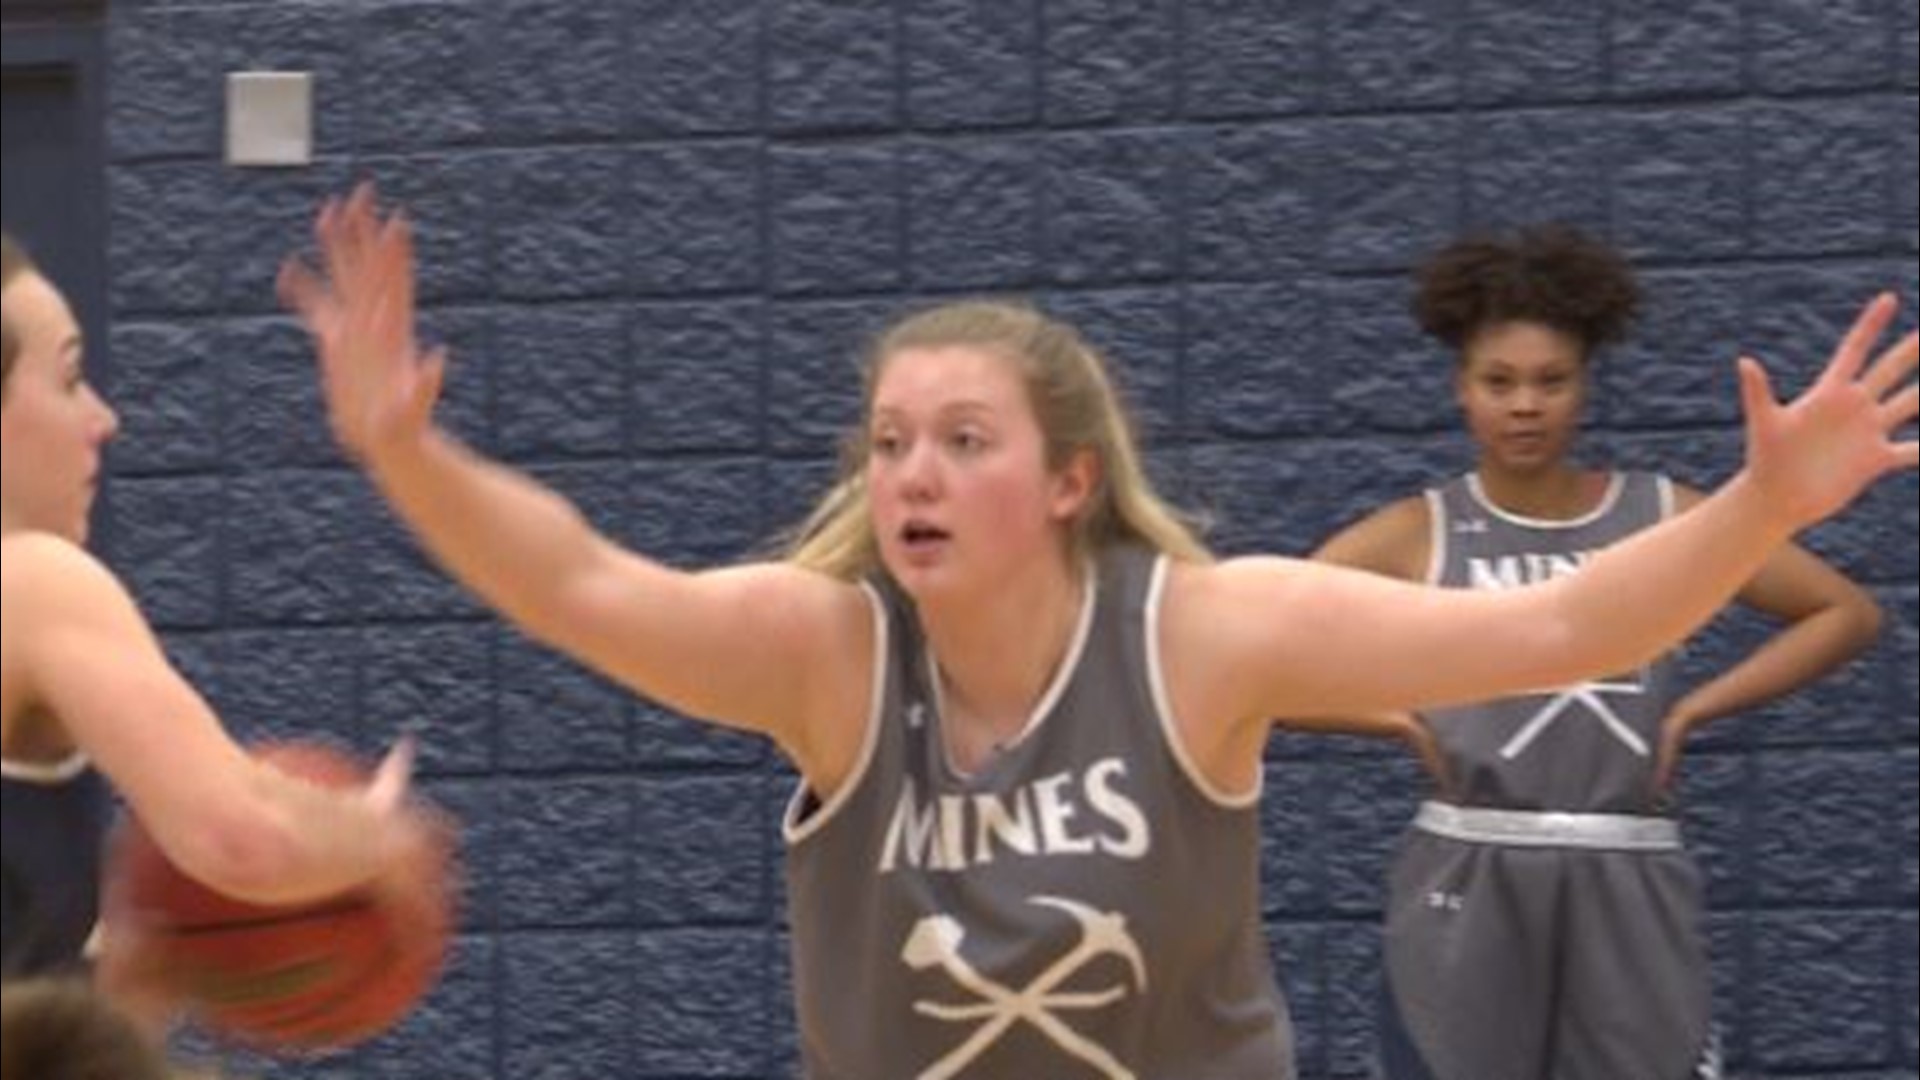 Courtney Stanton, a junior at Colorado School of Mines, takes us through a day in the life of a chemical engineering major and center of the women's basketball team.